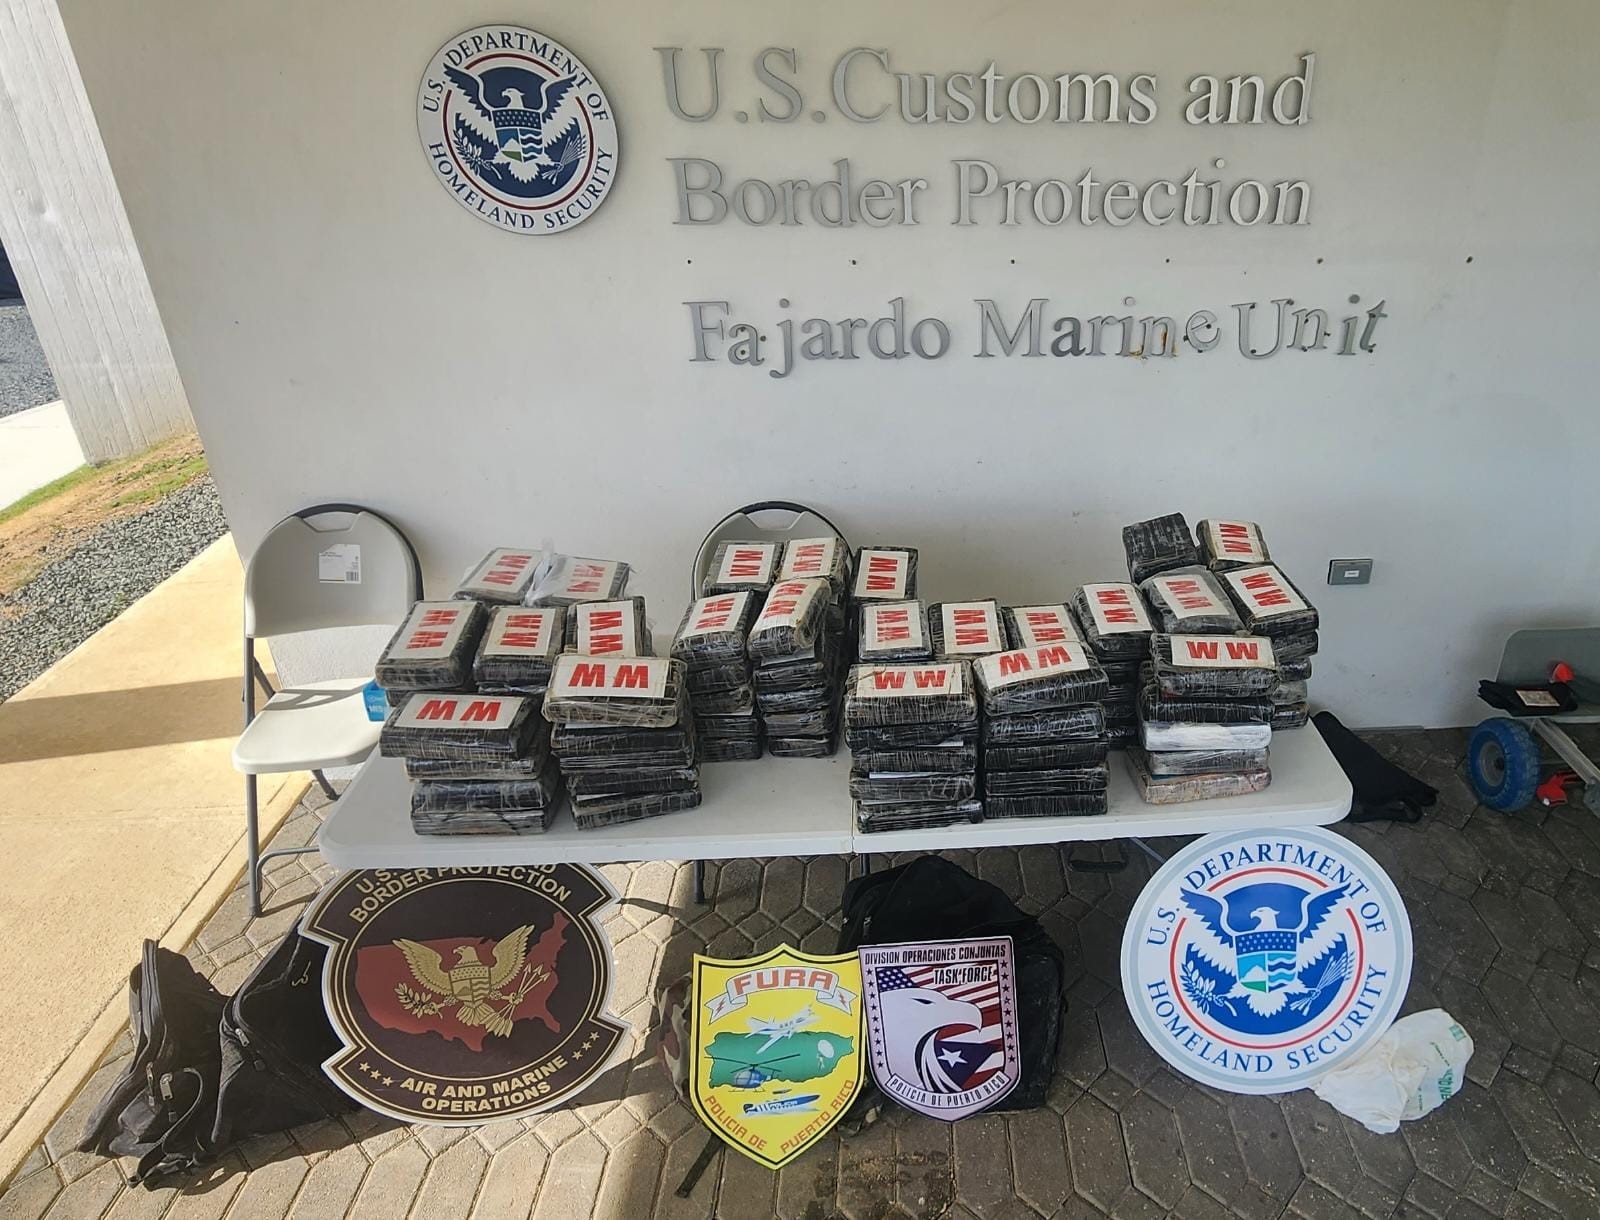 Customs and Border Protection Agents, with help from the Puerto Rico Police Department, seized 136 bricks of cocaine with an estimated street value of $3.1 million on Wednesday and Thursday. (Photo courtesy Customs and Border Protection)